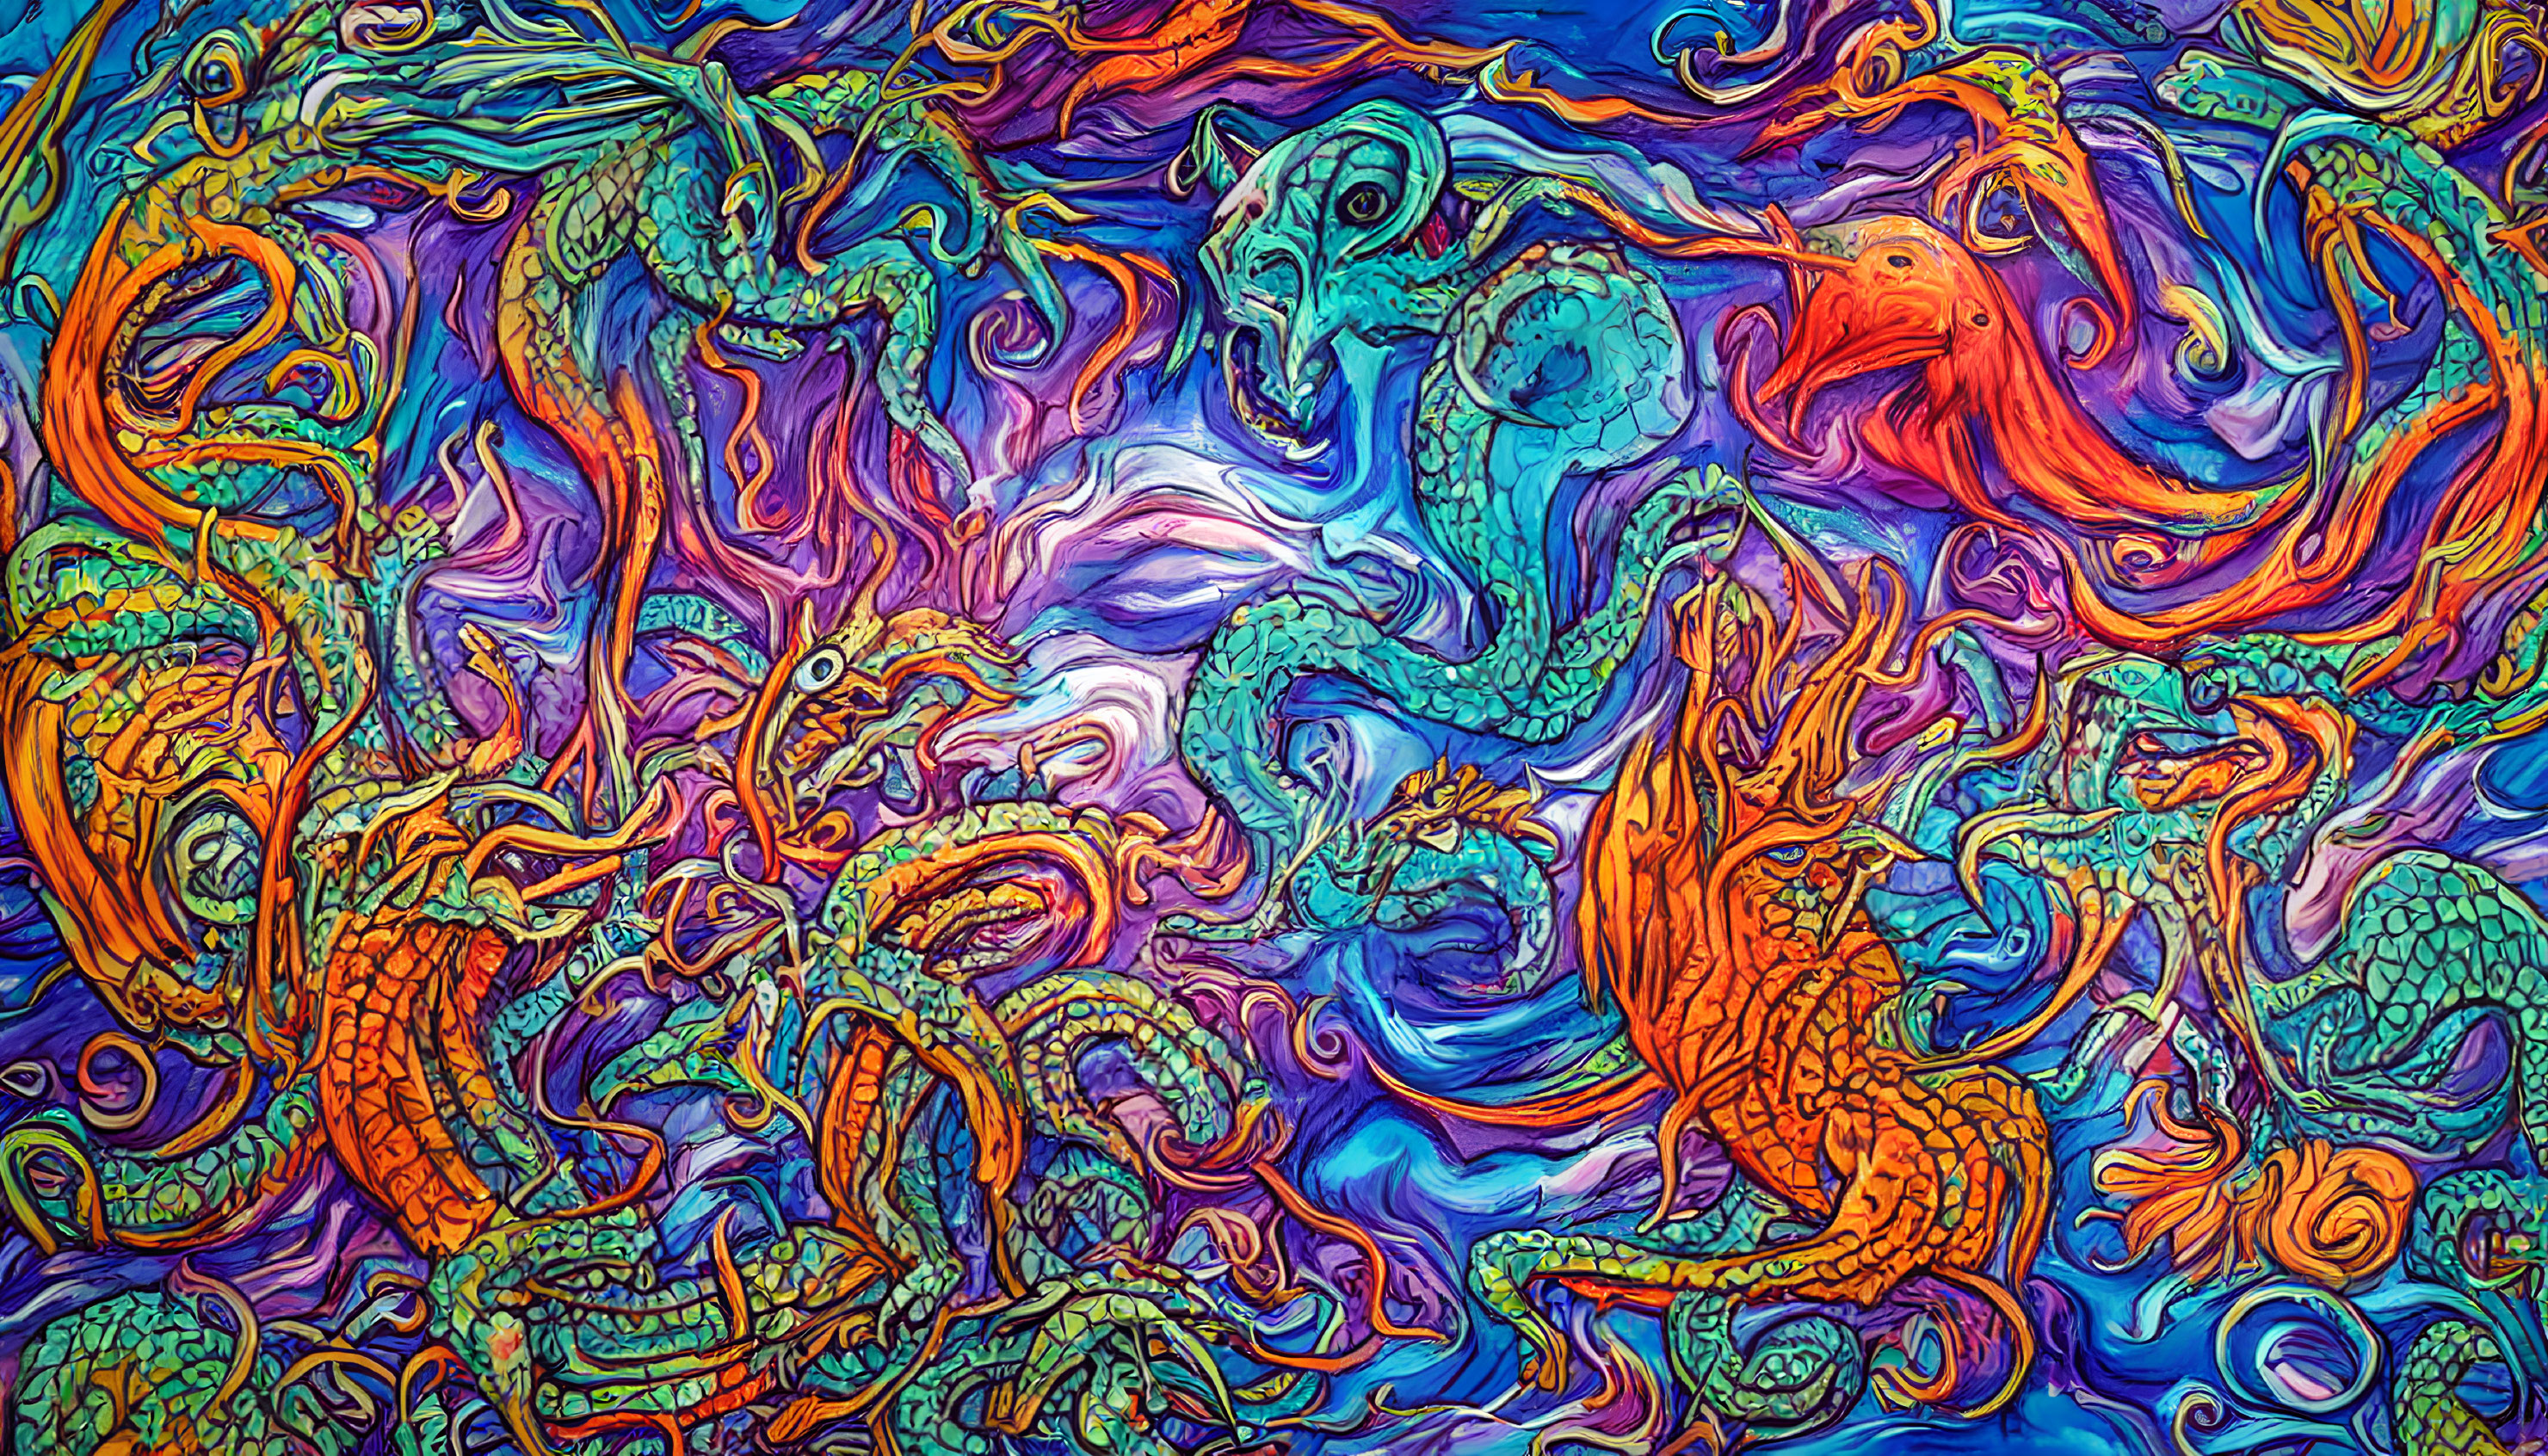 Colorful Dragon Artwork with Swirling Blue and Purple Patterns